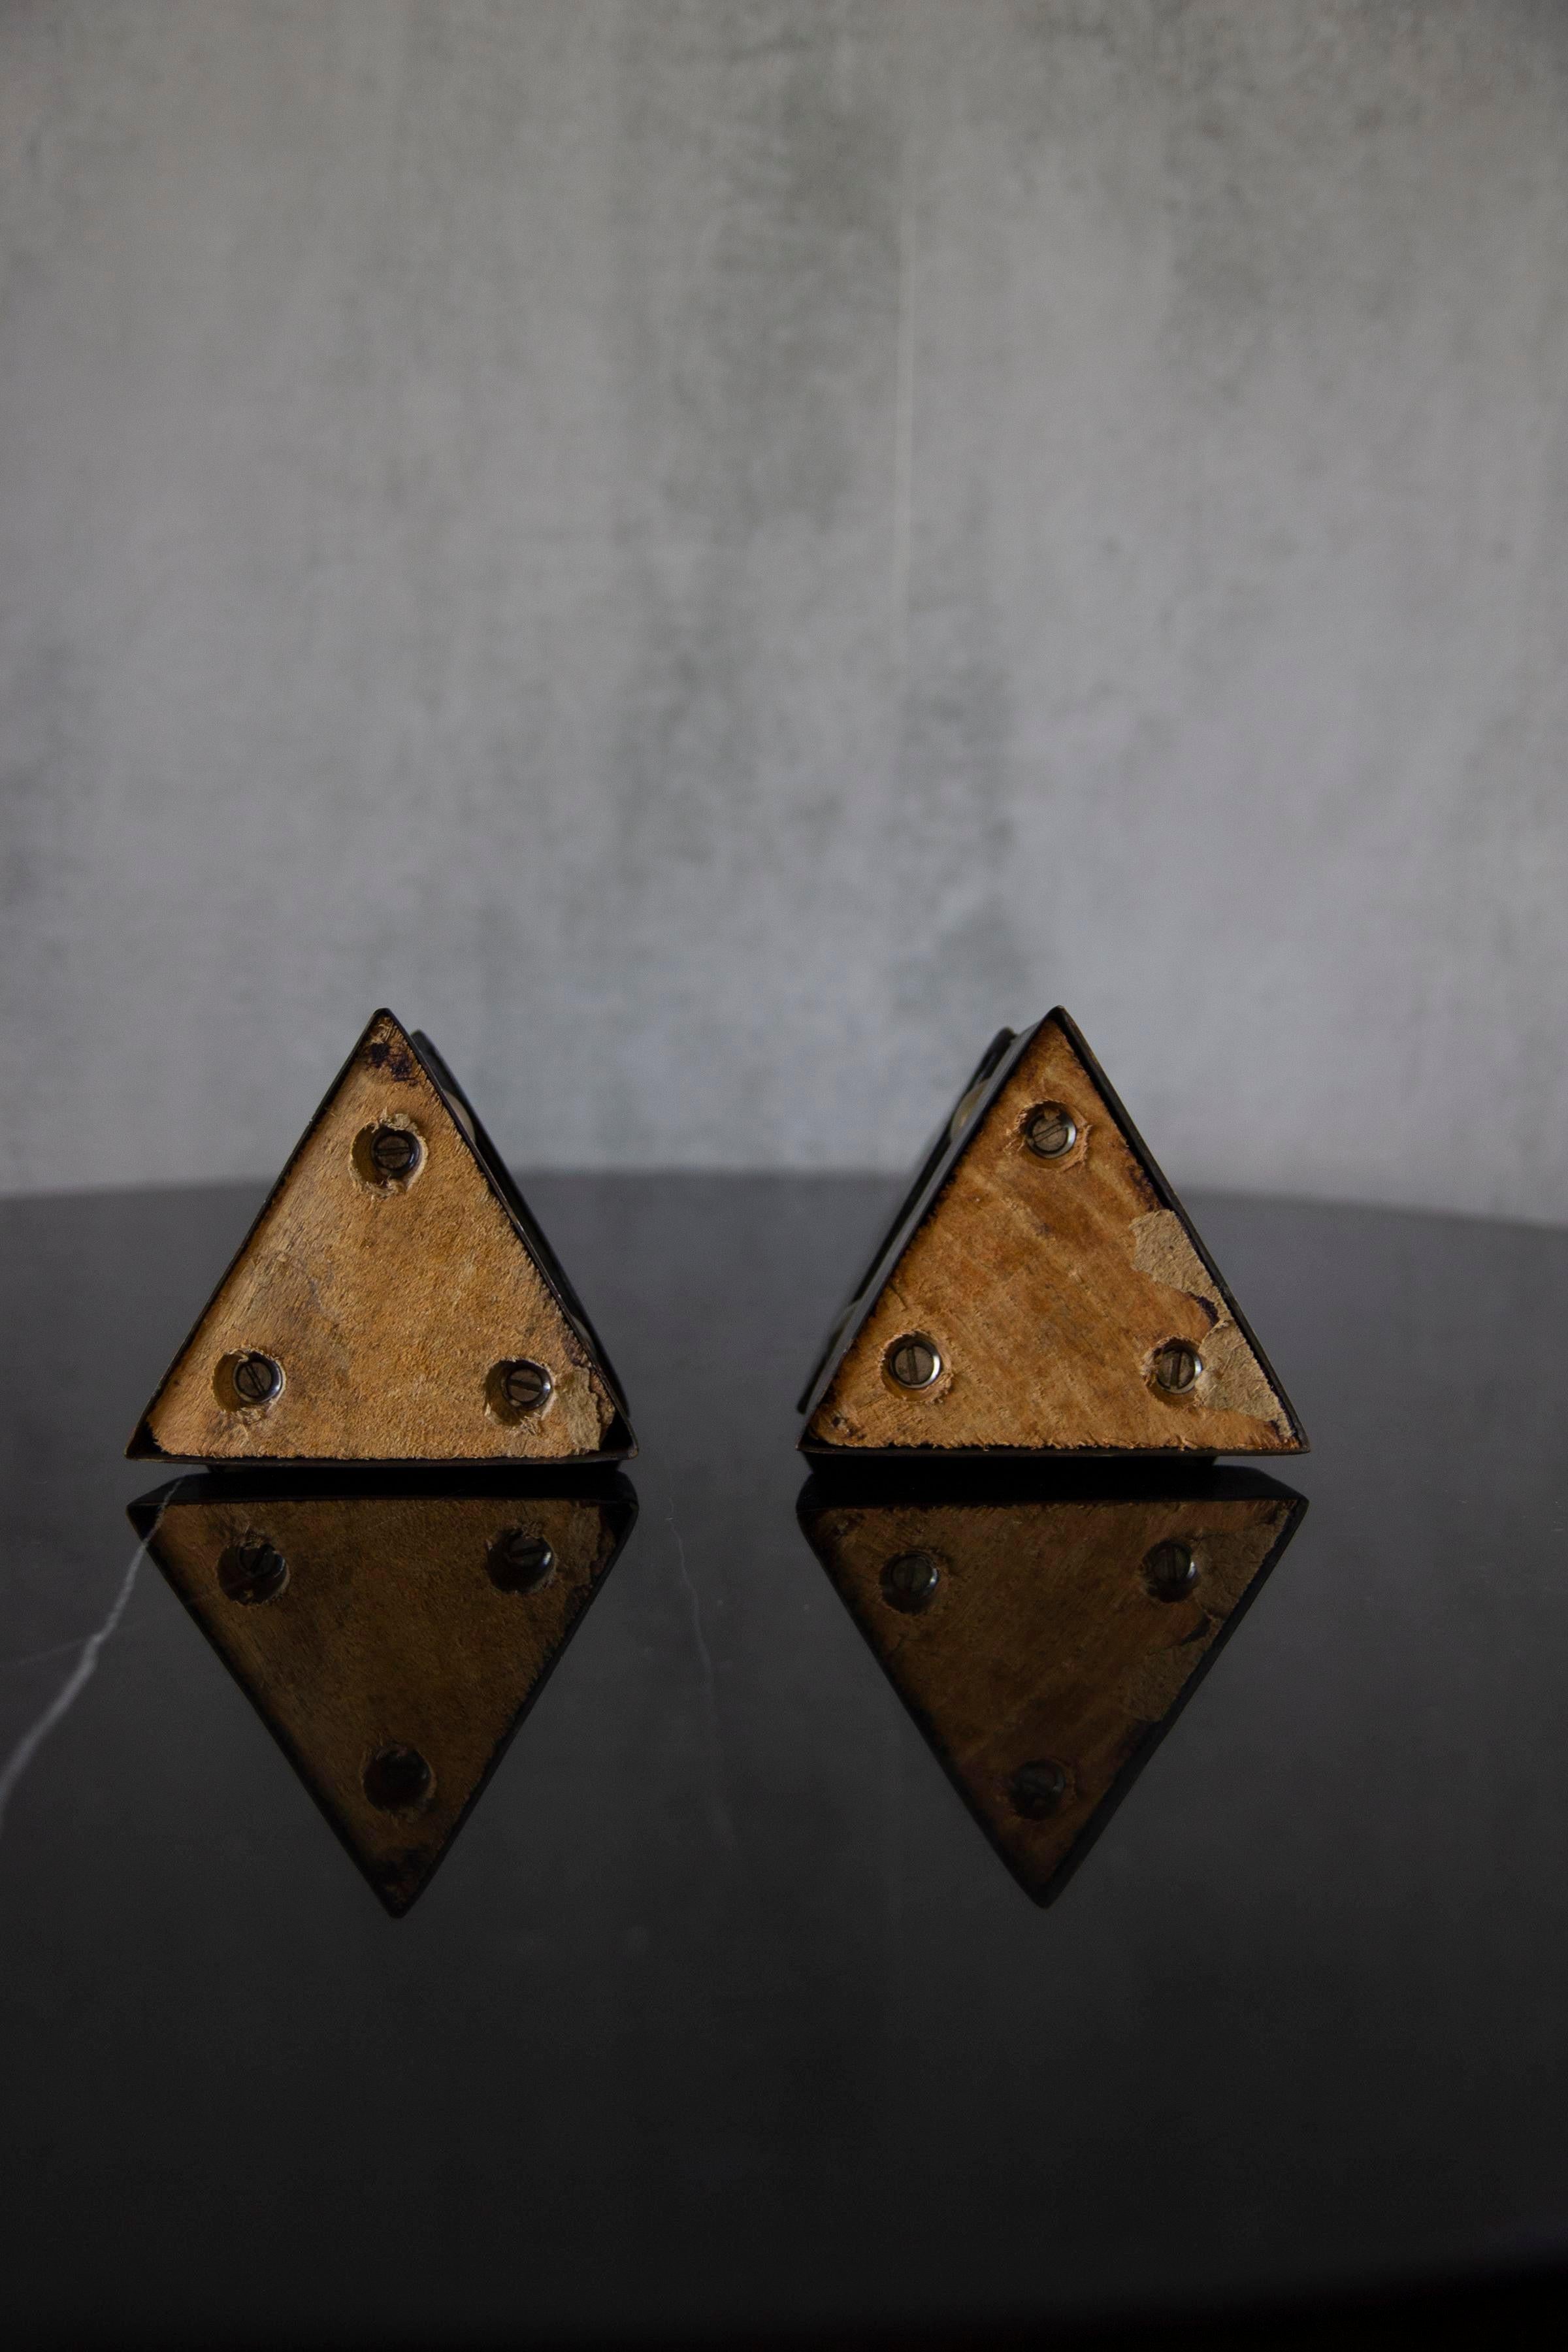 Pair of contemporary 'Pyramide' patinated brass.
Geometric sculptural shape, triangle shape supported by spherical plated brass. Perfect as a center piece for your living space.